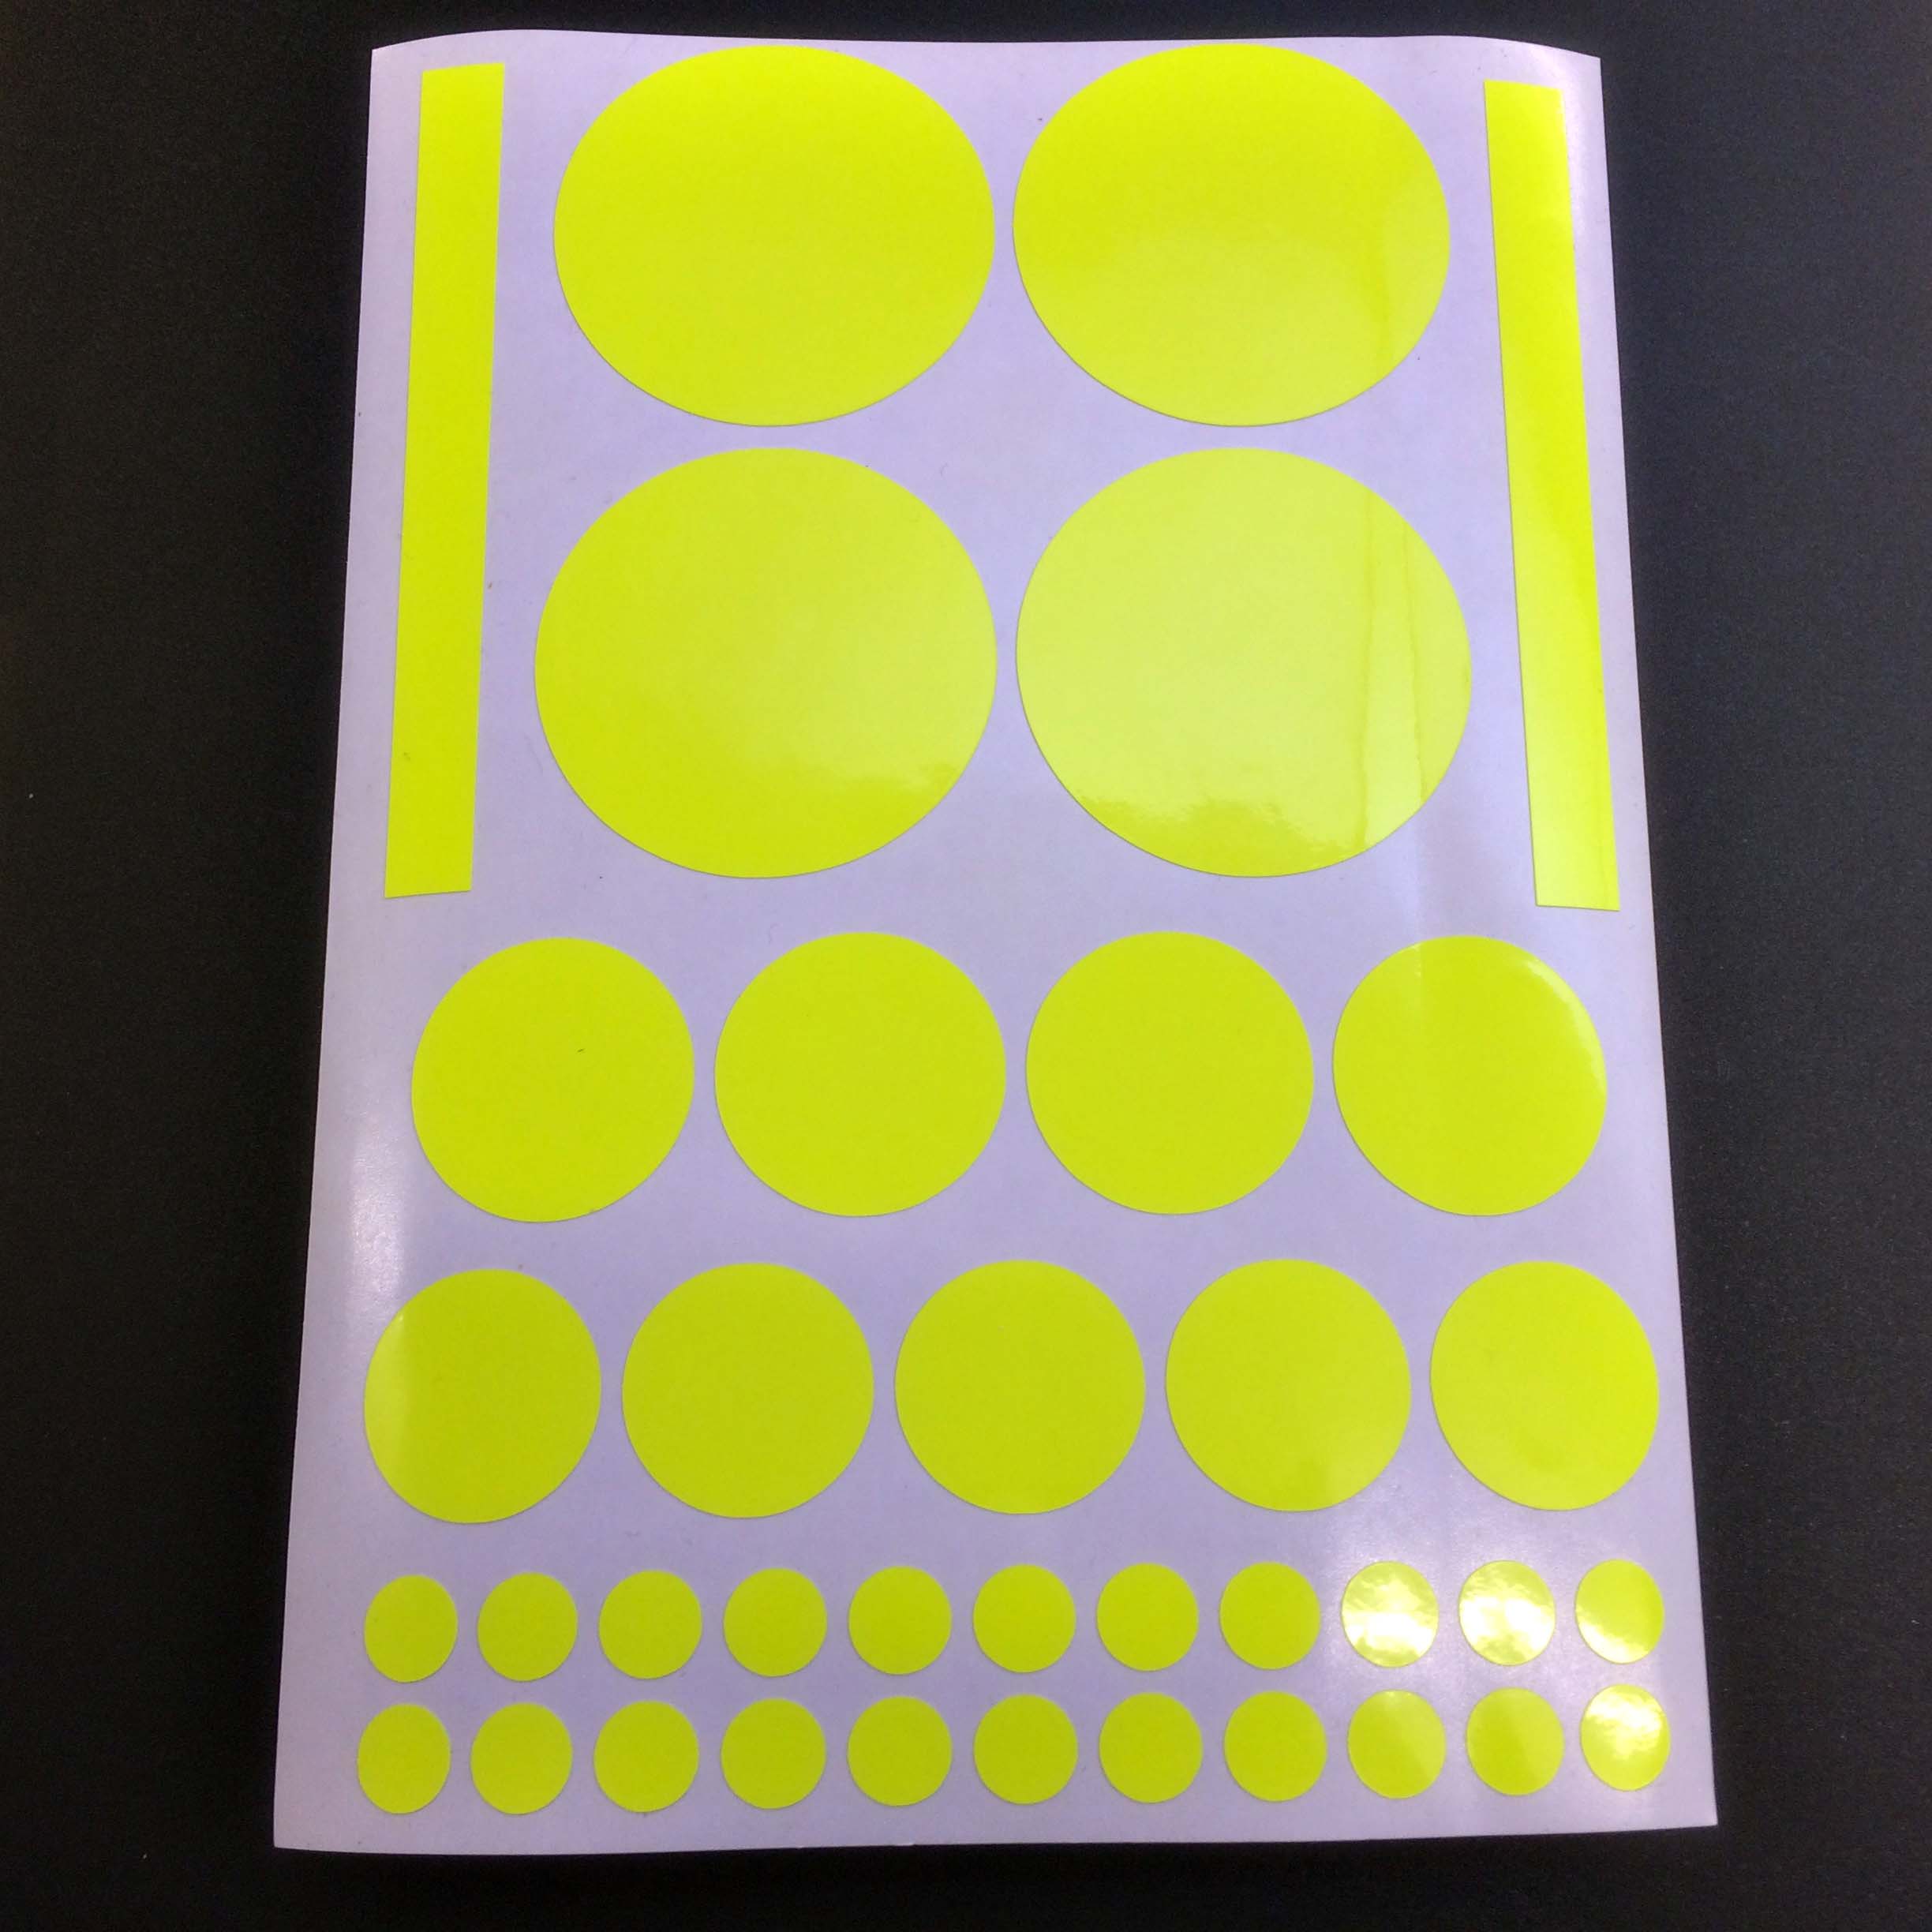 Fluorescent yellow dots and stripes.